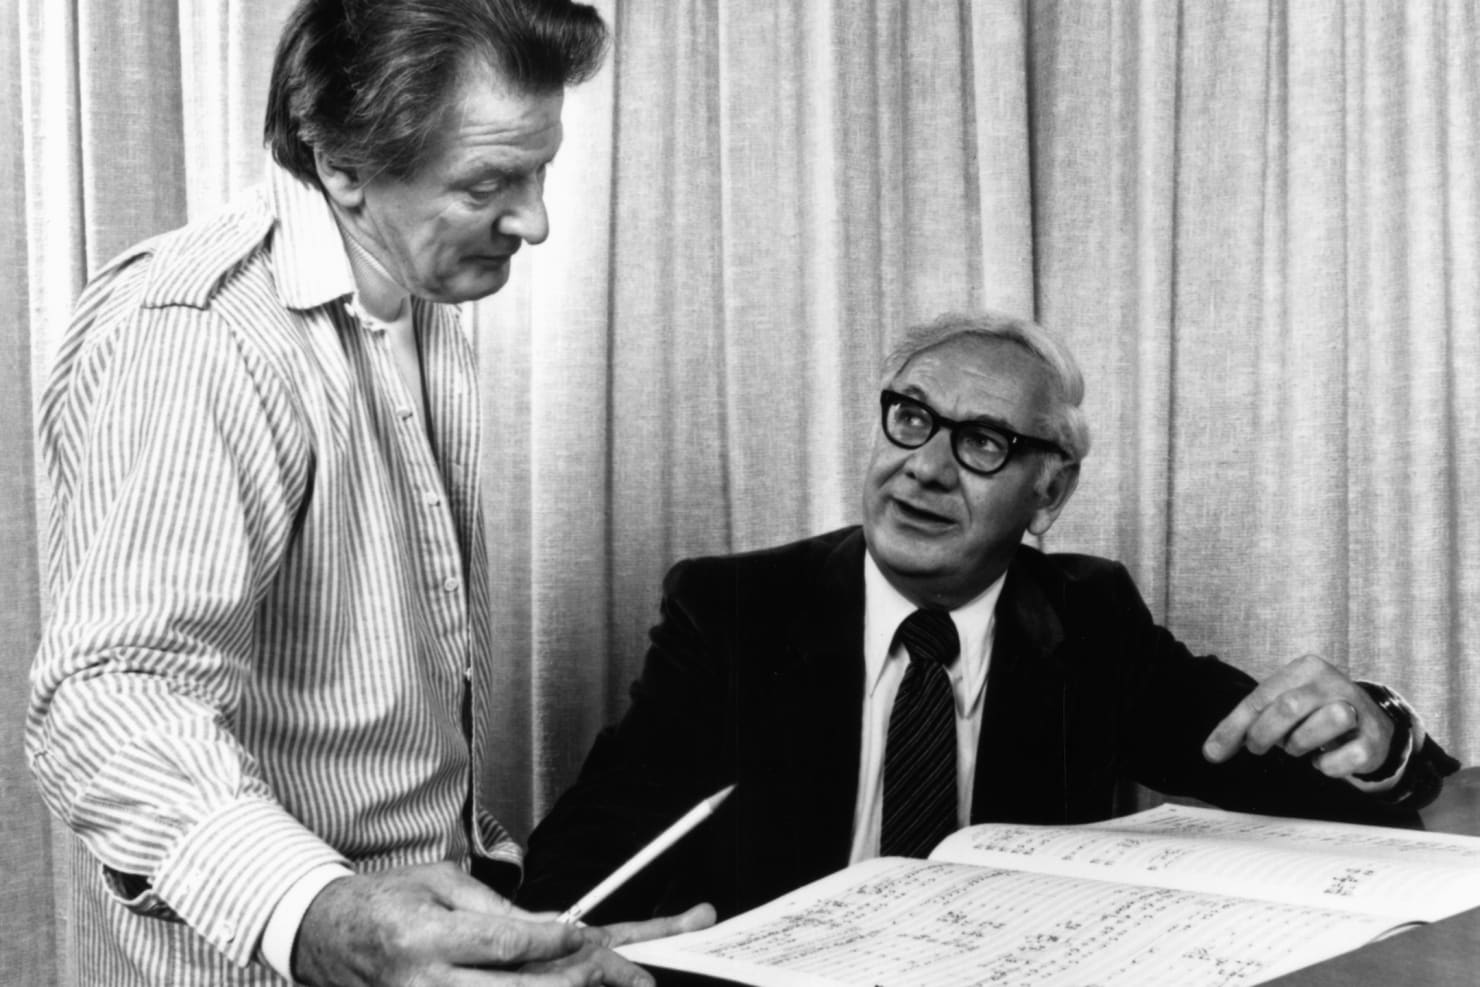 Neville Marriner and Dominick Argento talking in front of sheet music